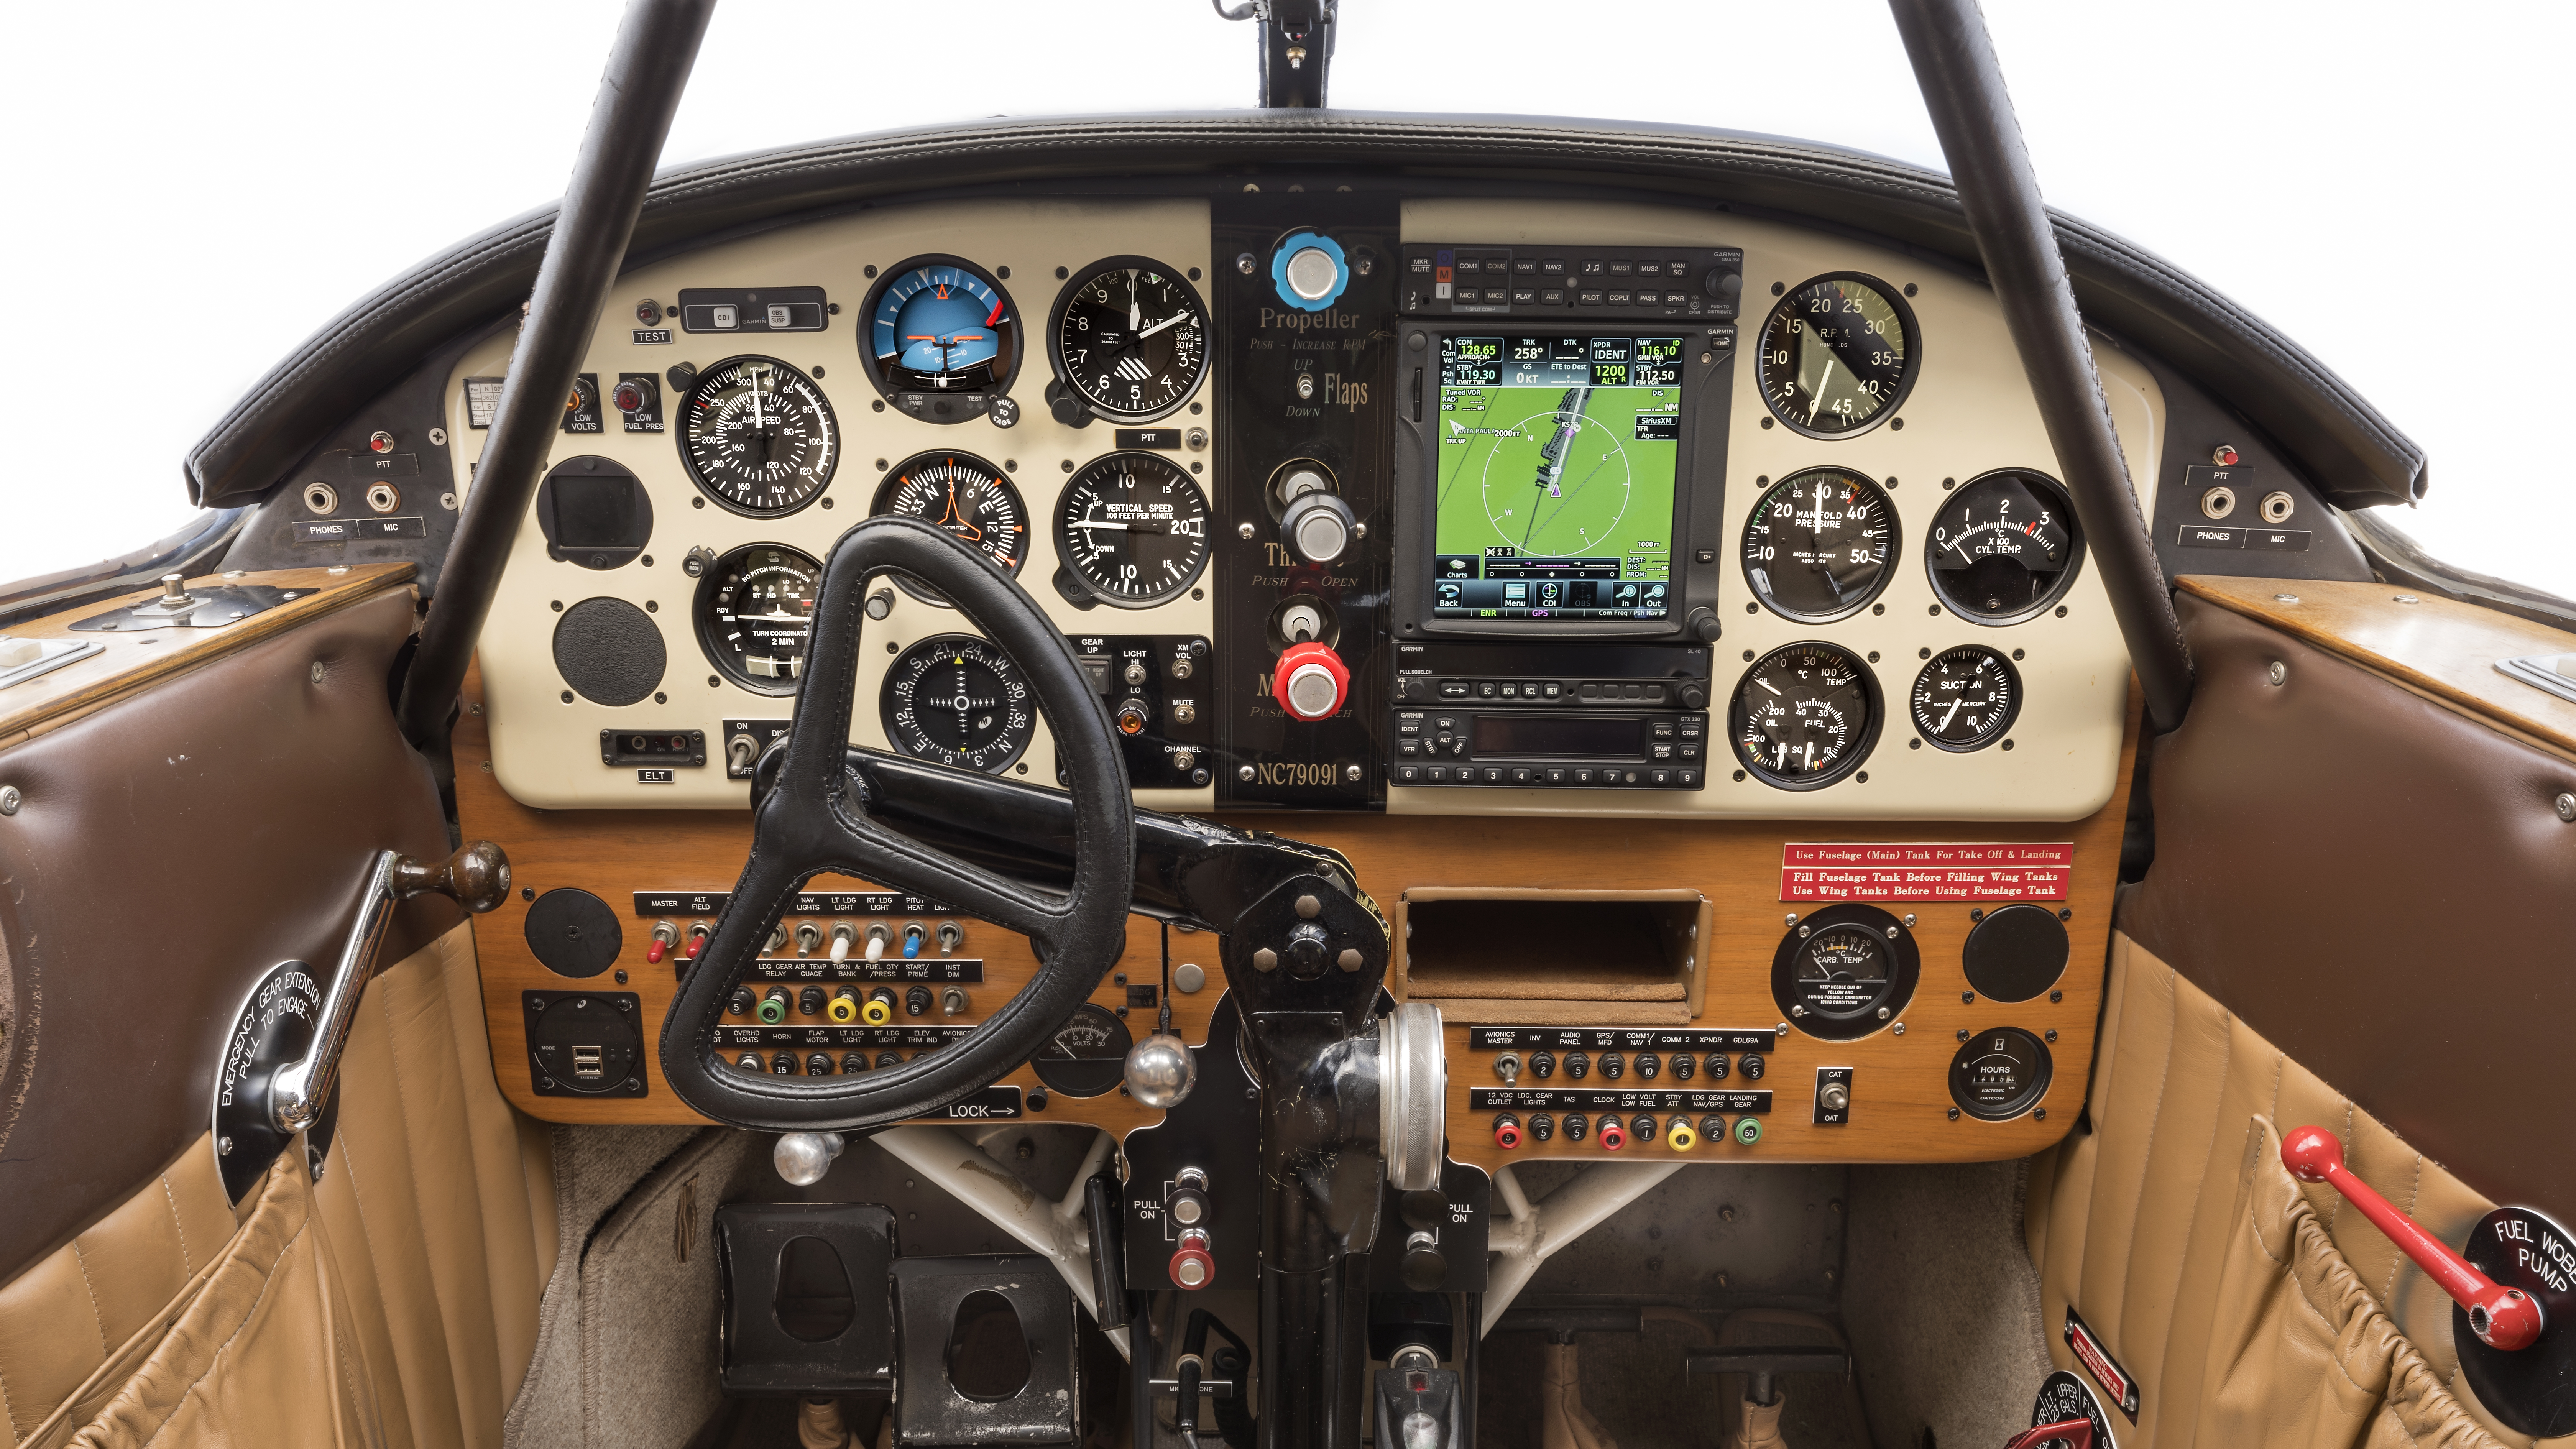 The Mid-Continent Instruments and Avionics Staggerwing features a panel that shows off the company's instruments. Photo by Chad Slattery.